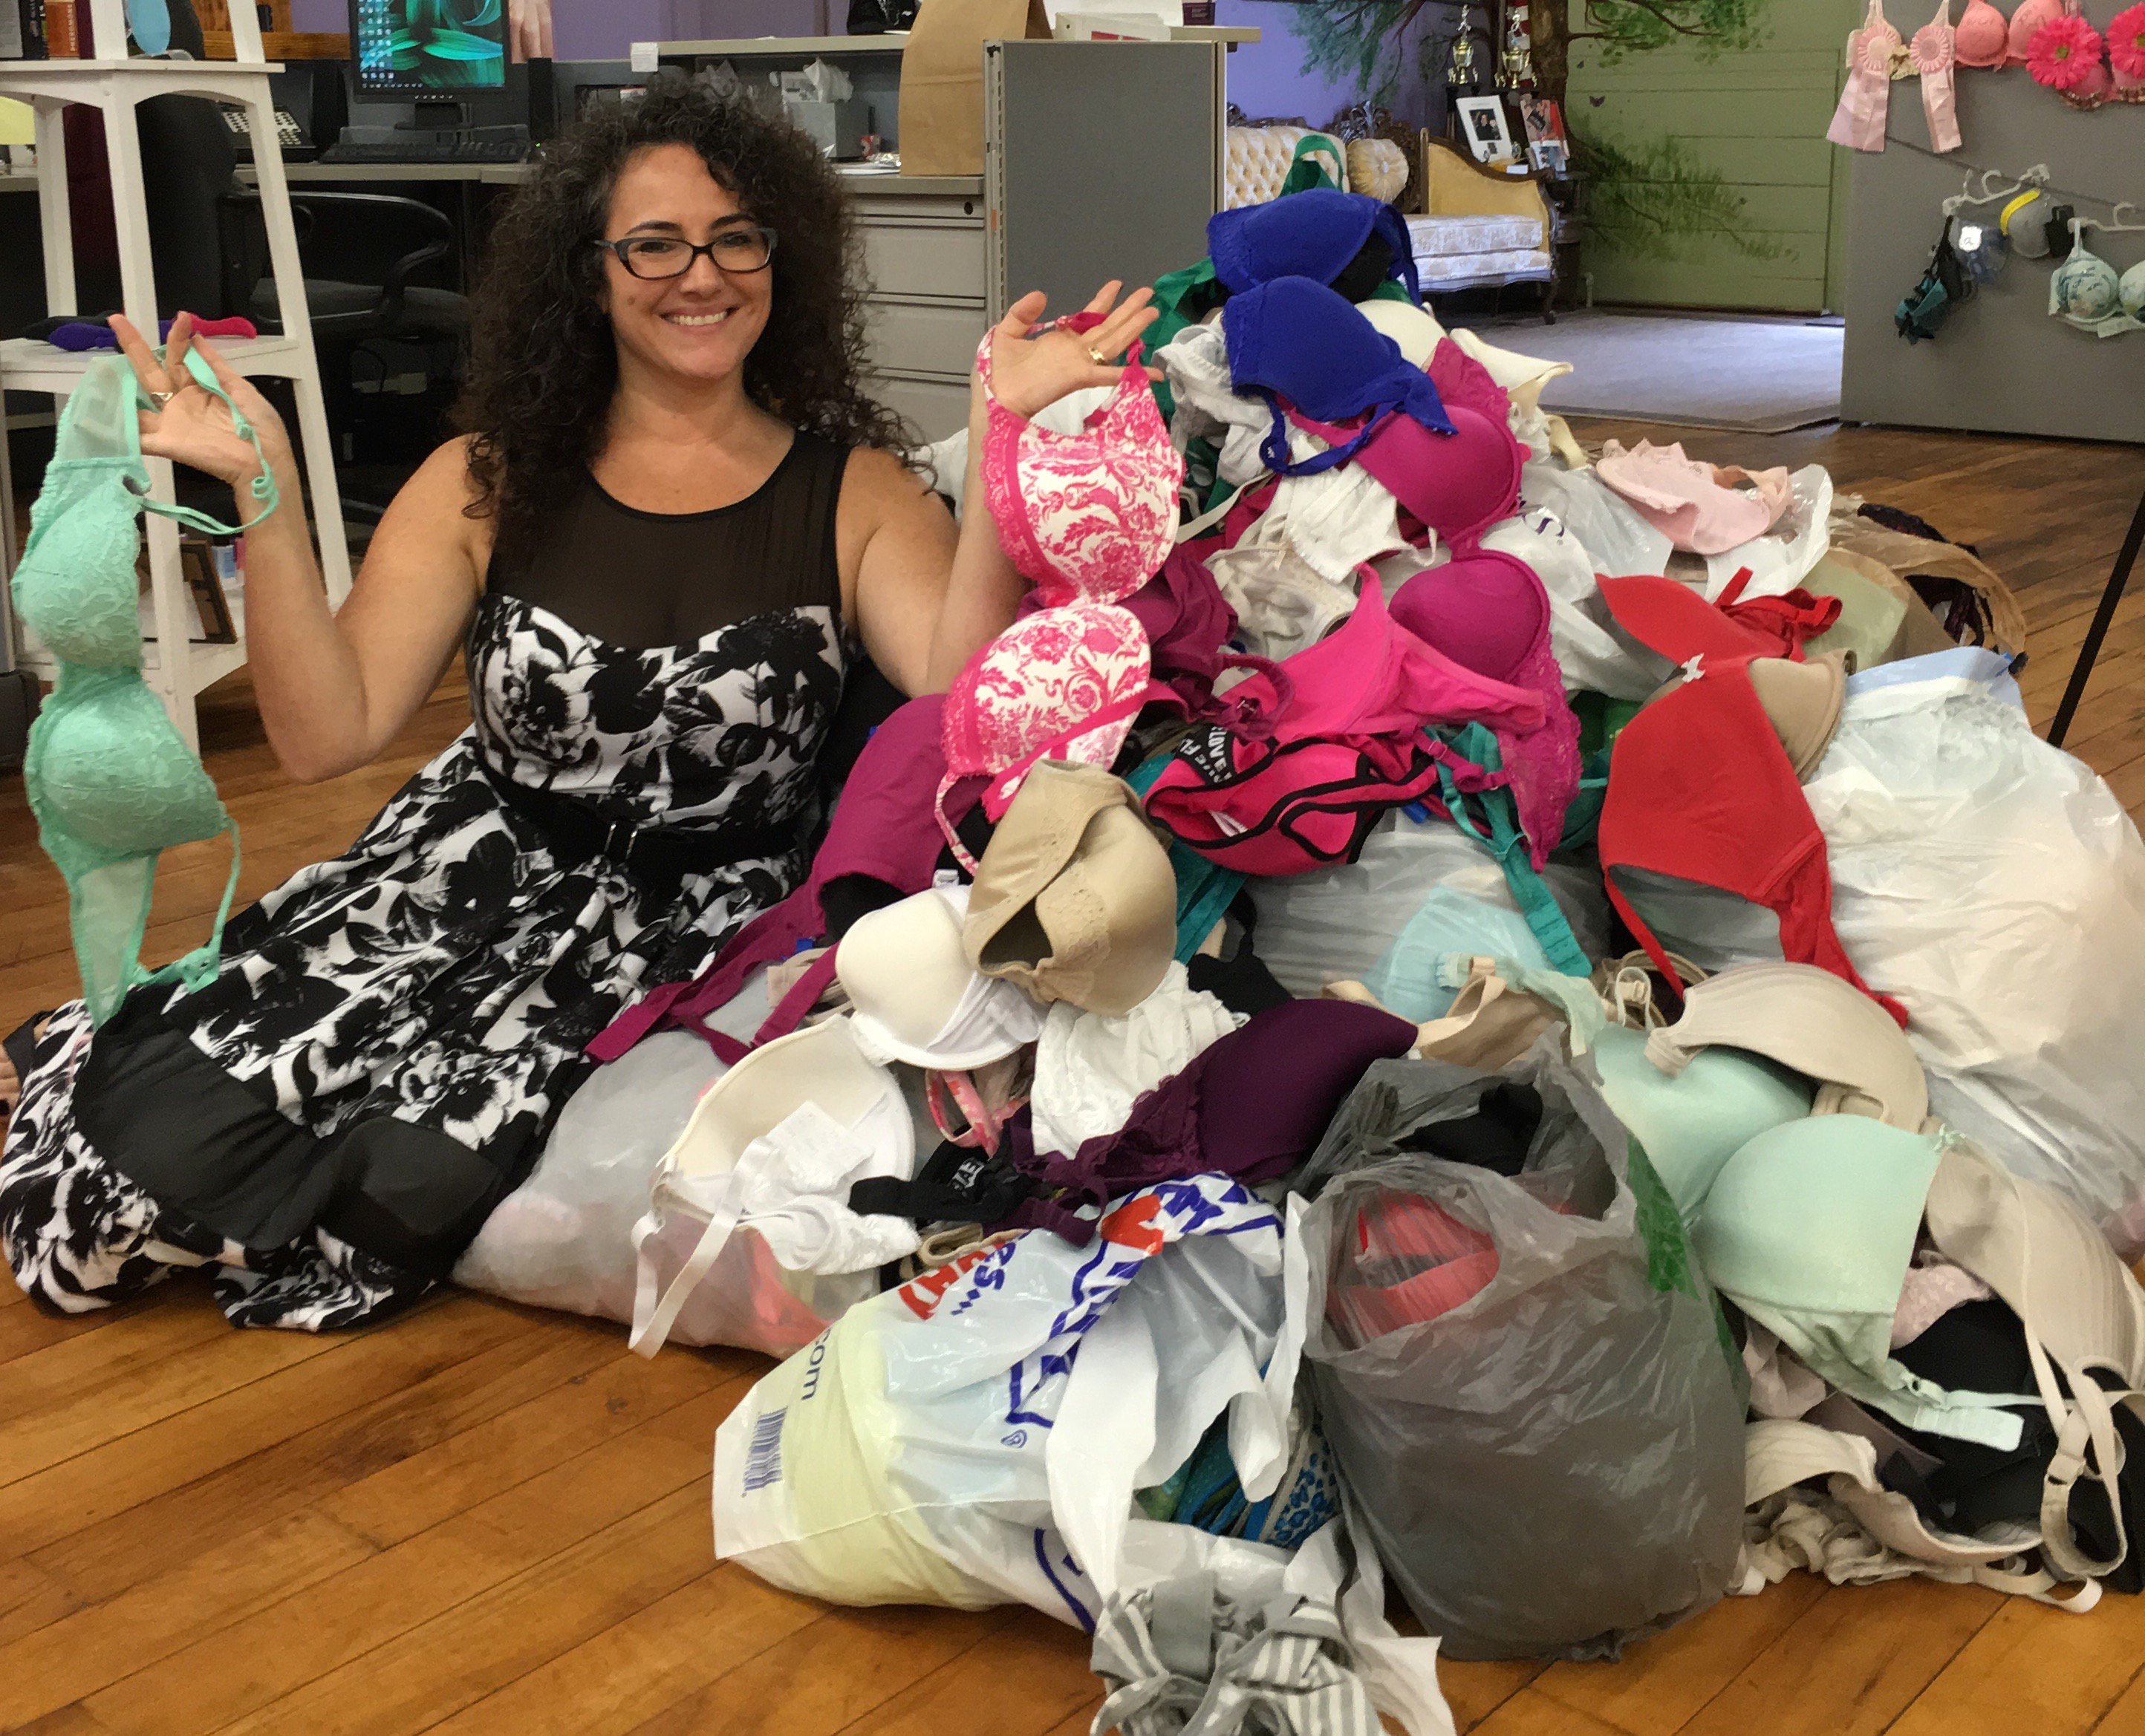 The Athena's Cup on X: Another huge pile of bra donations has